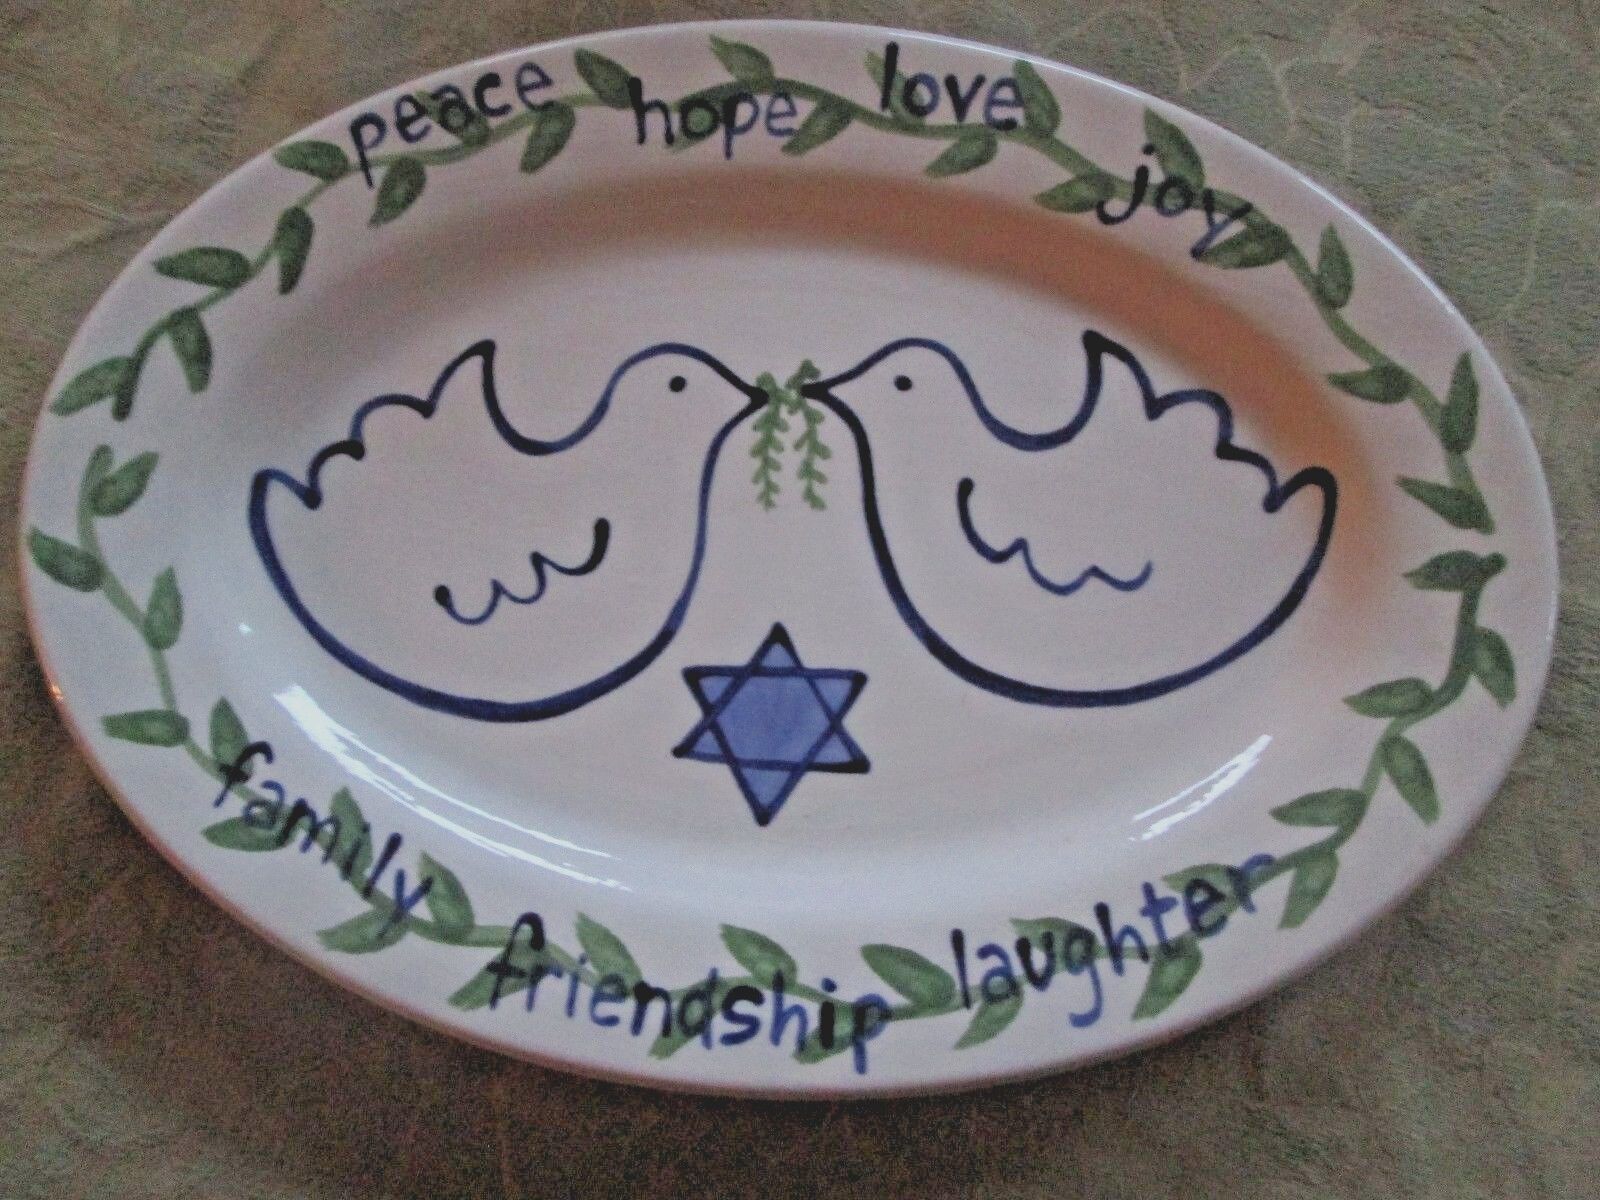 Lorrie Veasey Our Name is Mud 12.5 x 9 Oval Platter Hanukkah Peace Doves Shalom